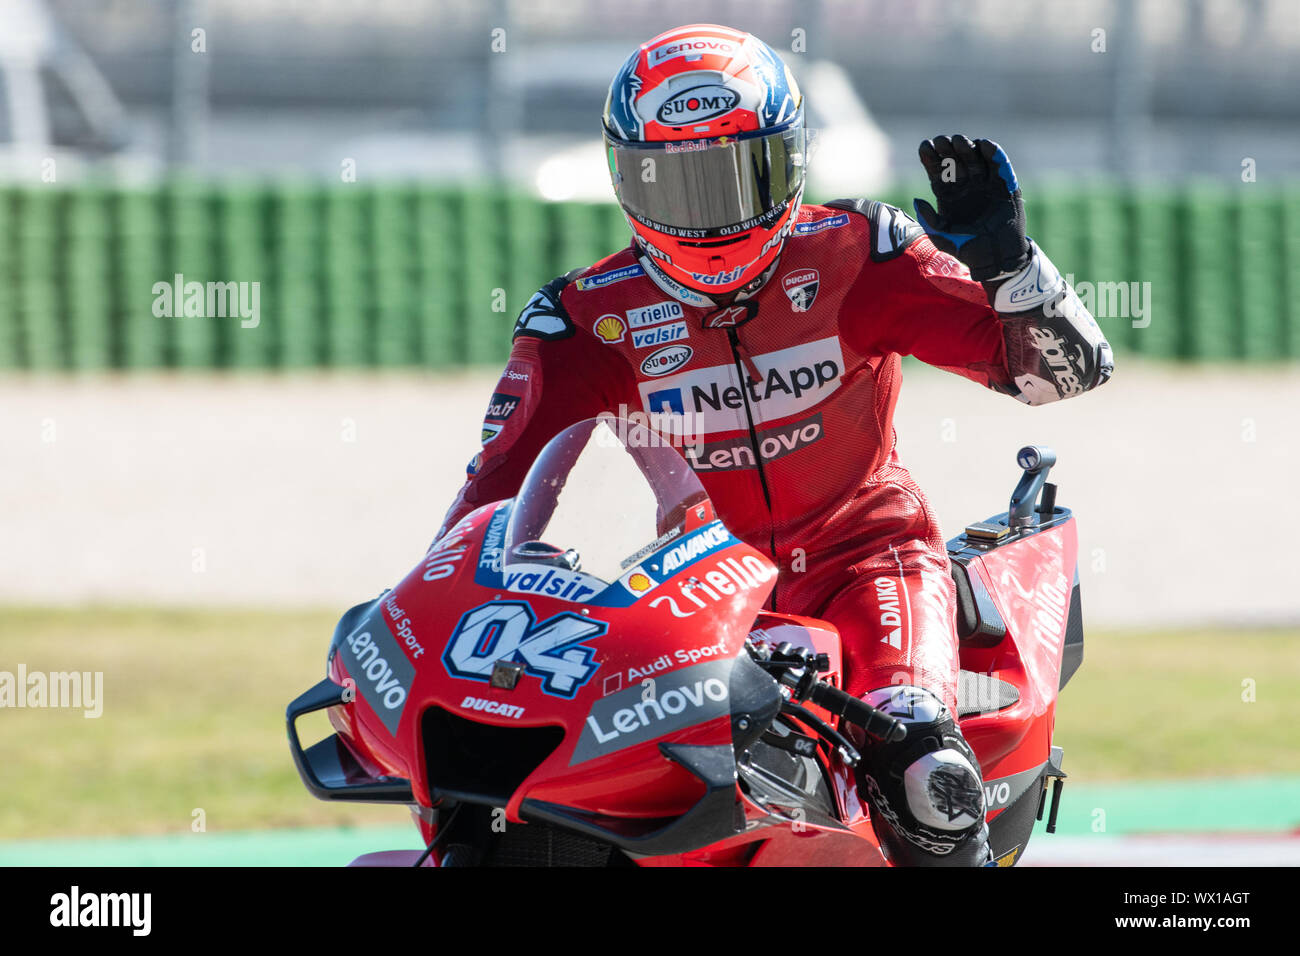 ANDREA DOVIZIOSO, ITALIAN RIDER NUMBER 04 FOR DUCATI TEAM IN MOTOGP during  Saturday Free Practice & Qualifications Of The Motogp Of San Marino And Ri  Stock Photo - Alamy